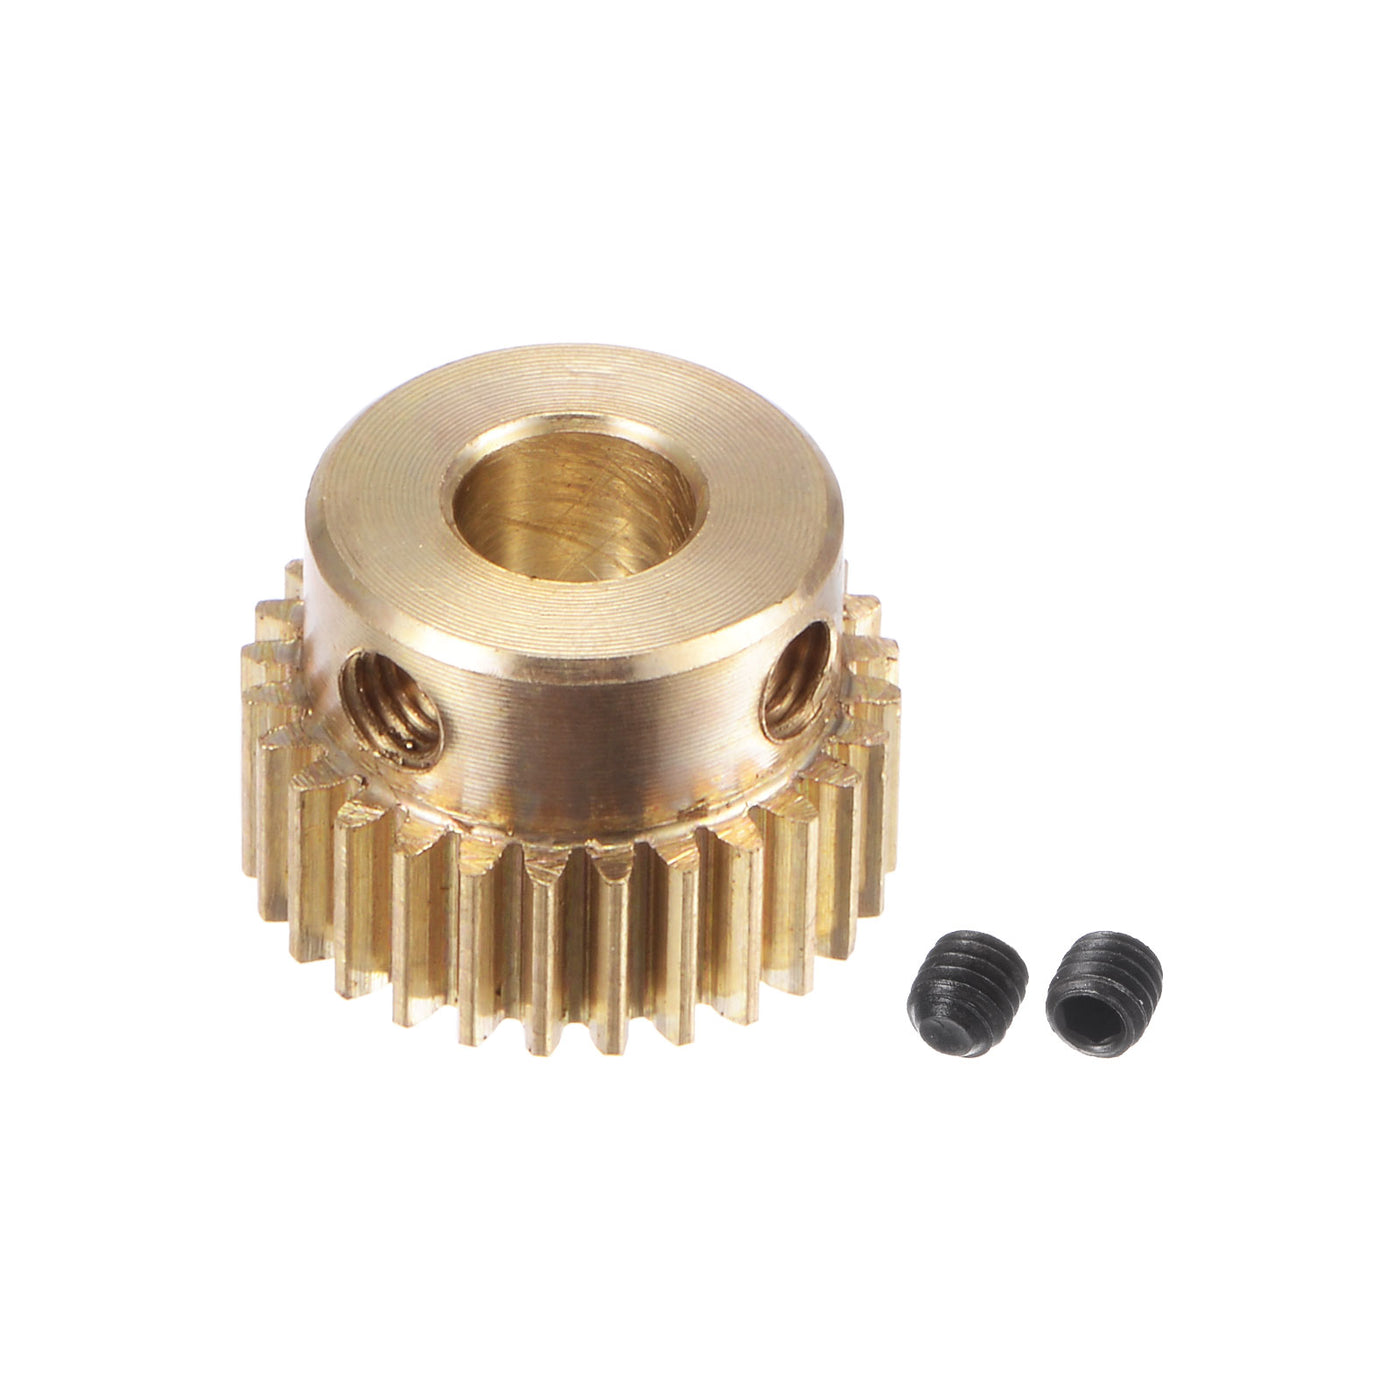 uxcell Uxcell 0.5 Mod 28T 4mm Bore 15mm Outer Dia Brass Motor Rack Pinion Gear with Screws